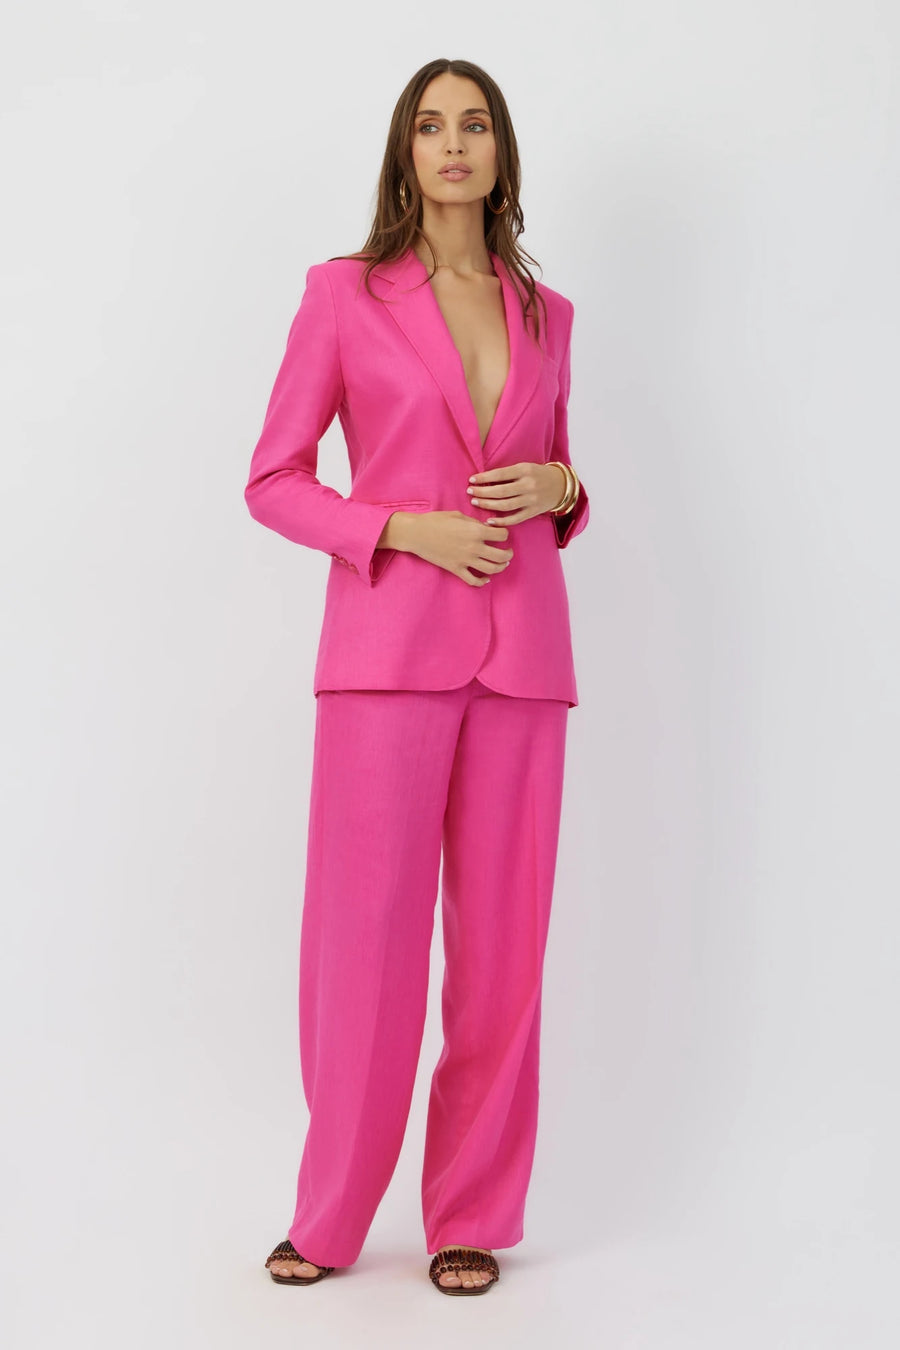 The Regatta belted wide leg pants in fuchsia by Greyven